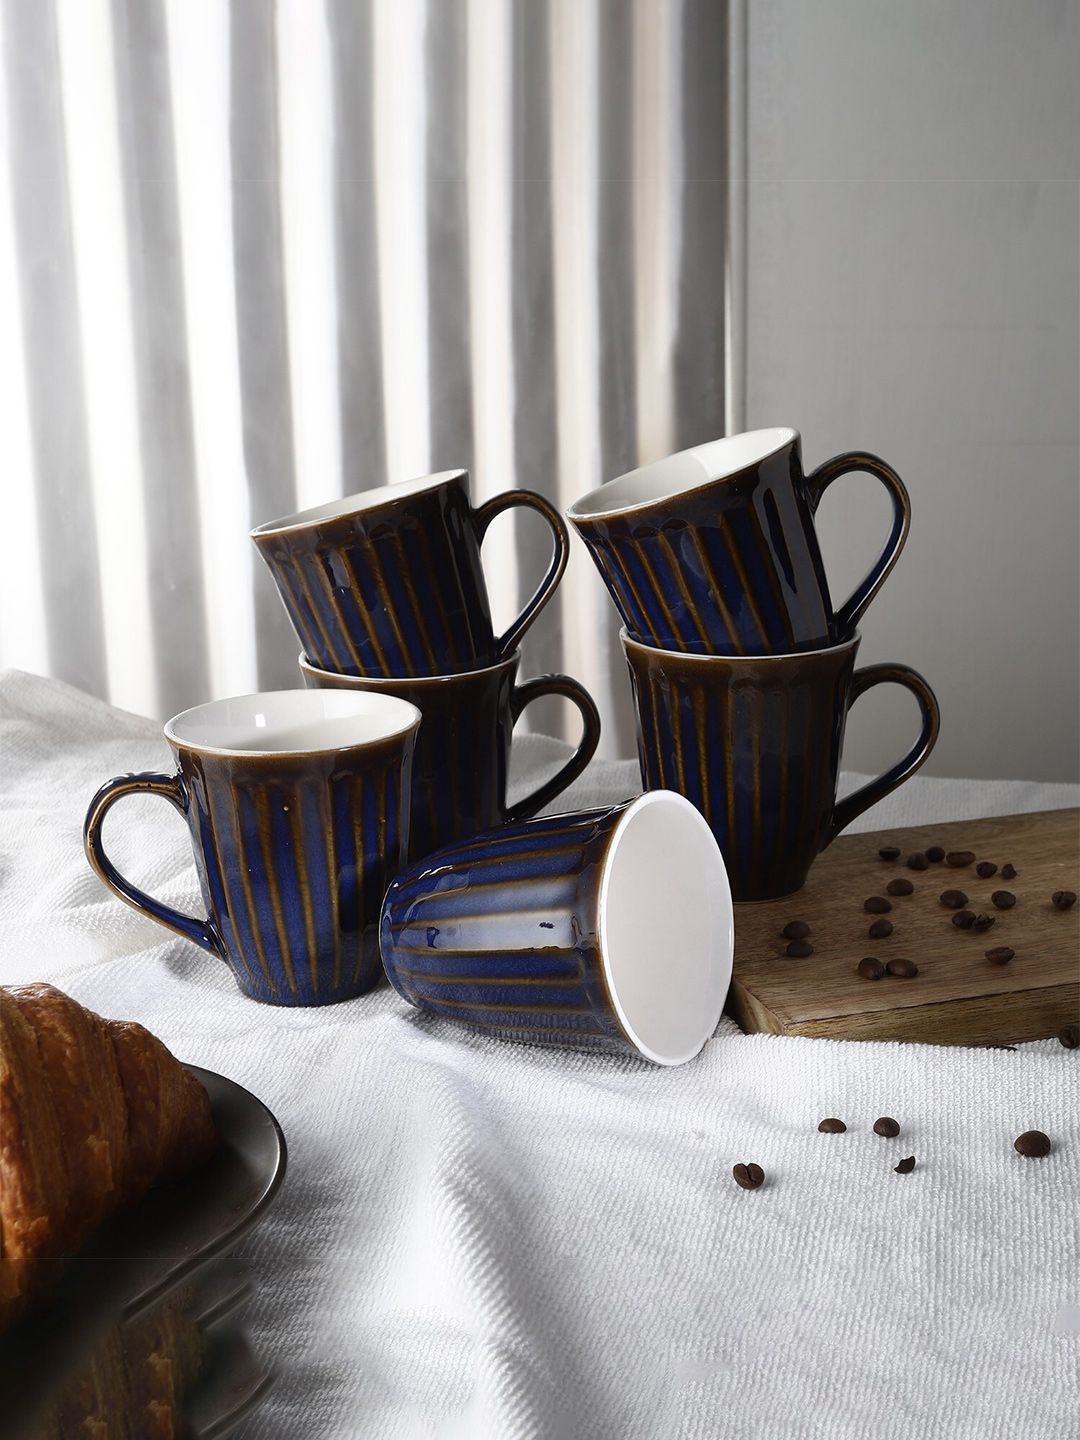 The Decor Mart Blue & Brown Solid Ceramic Glossy Mugs Set of Cups and Mugs Price in India